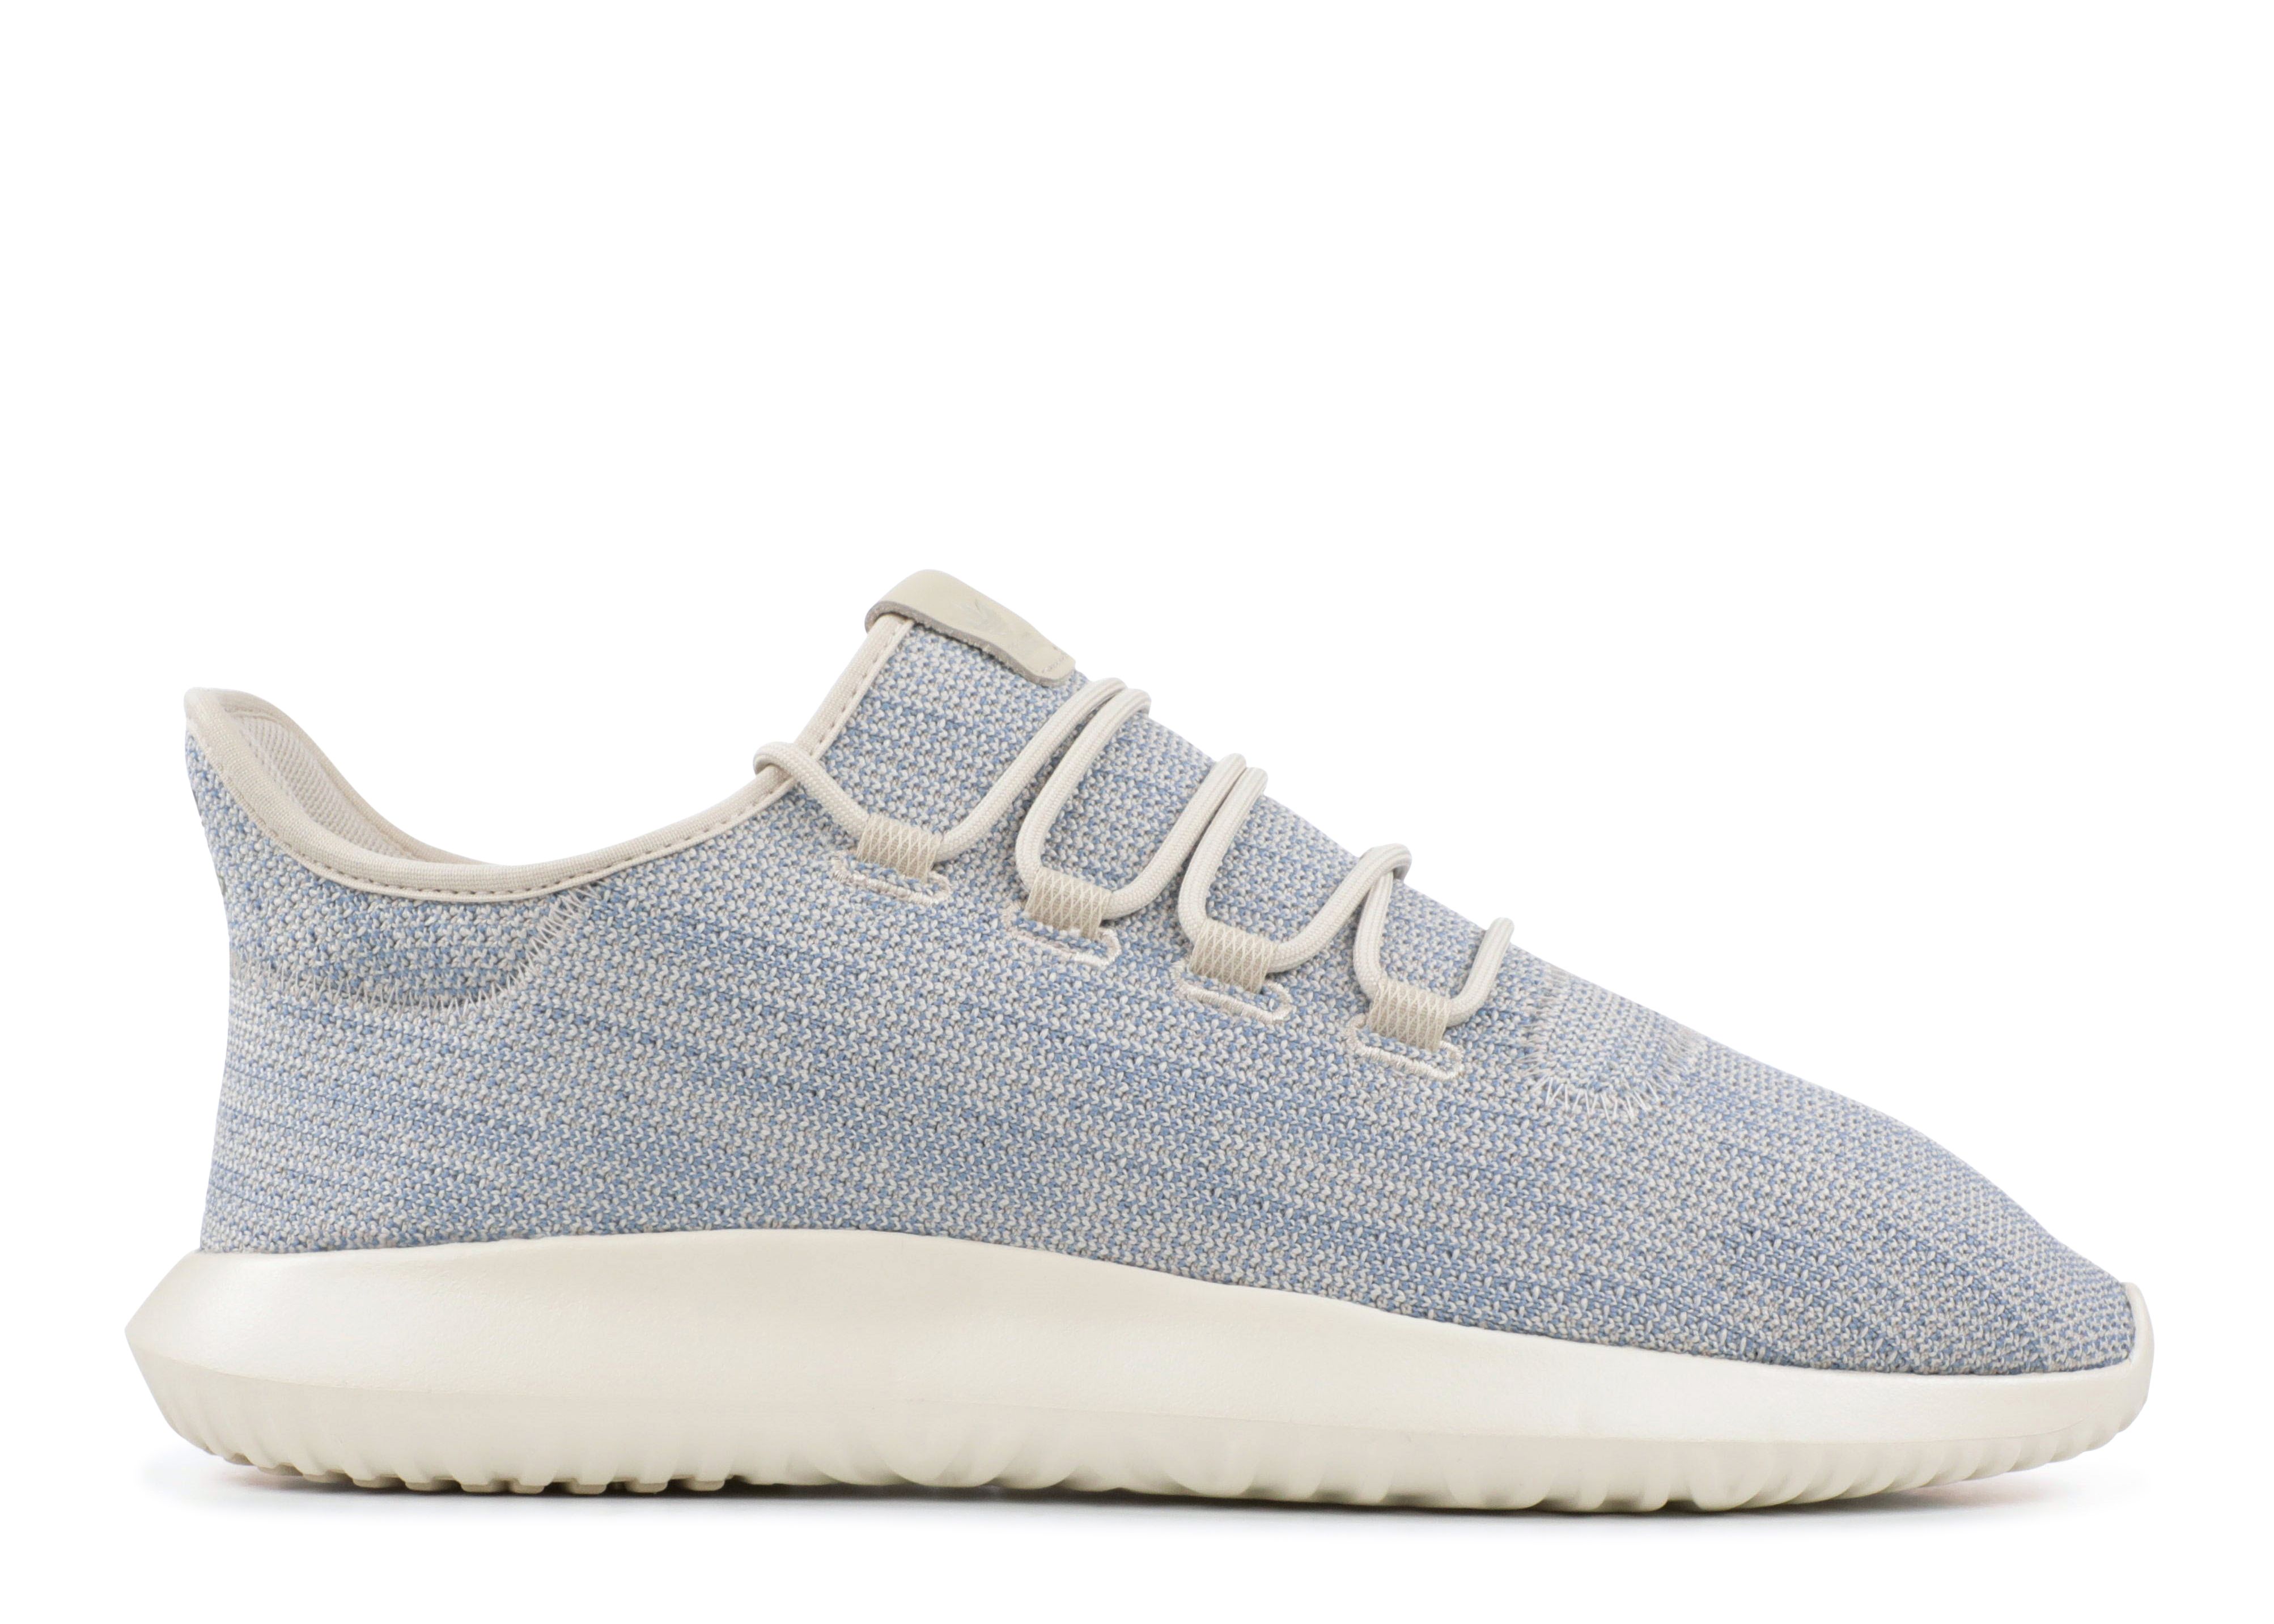 clear brown/tactile blue/chalk white 